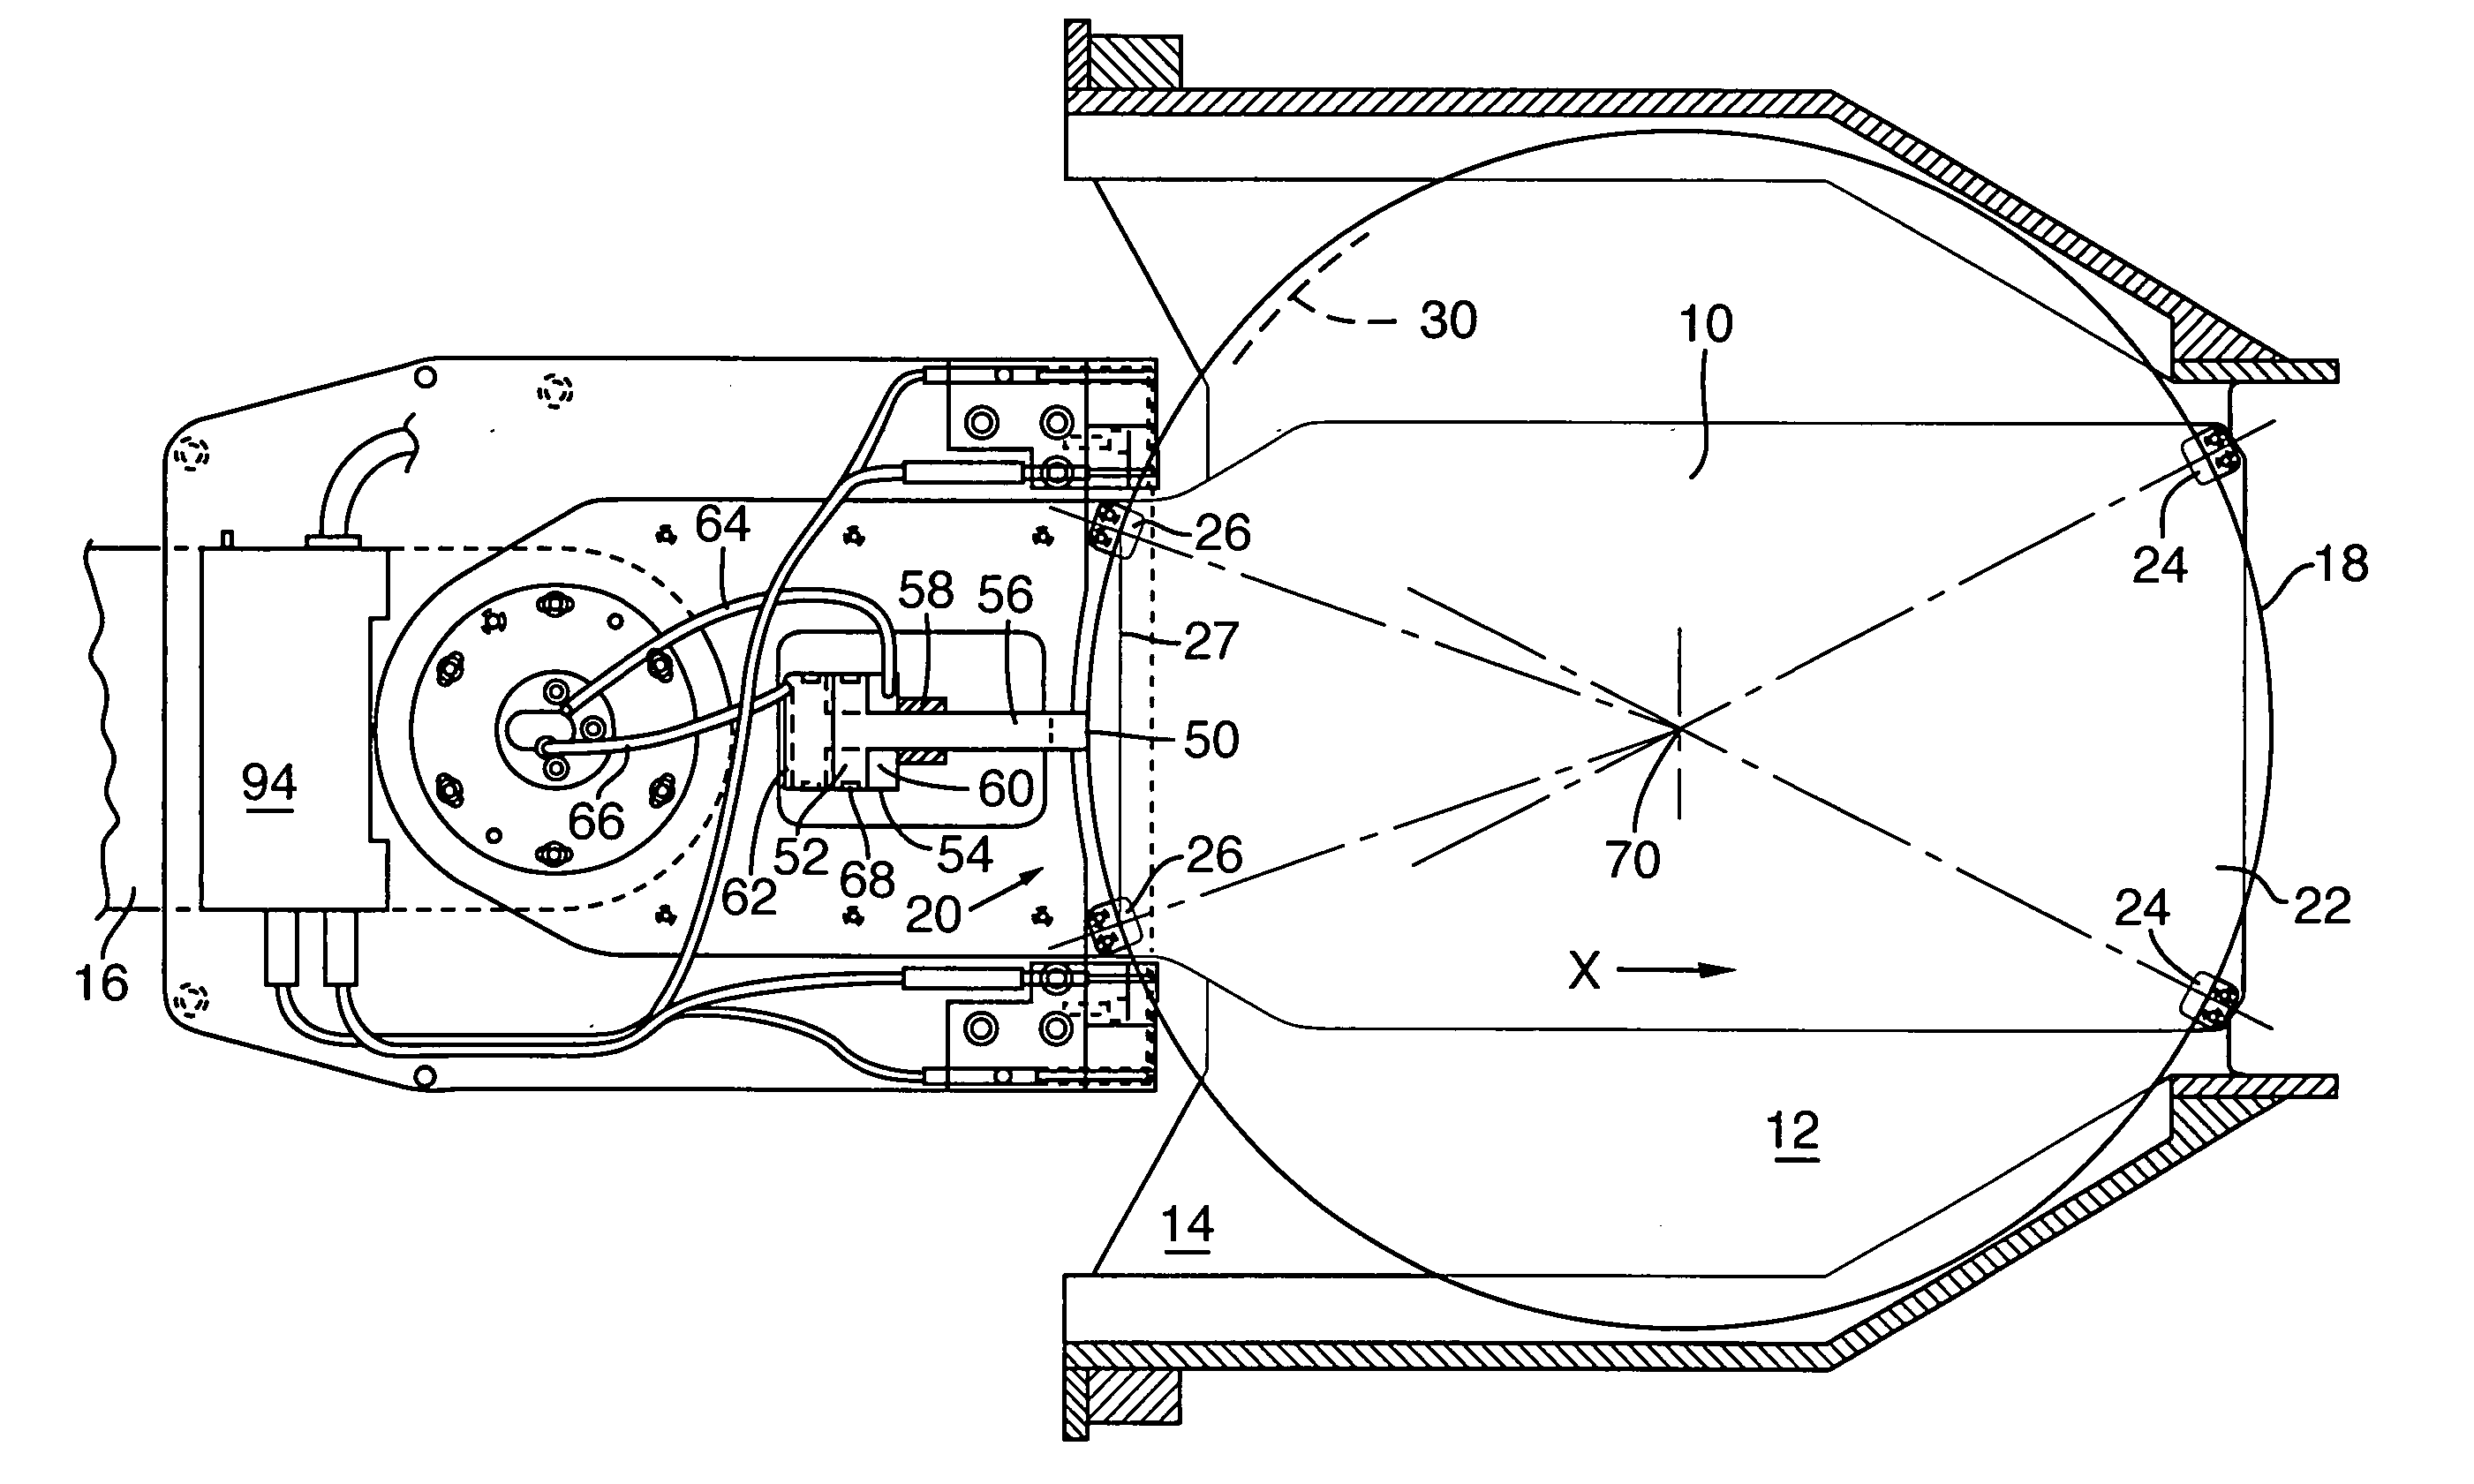 Method of determining axial alignment of the centroid of an edge gripping end effector and the center of a specimen gripped by it